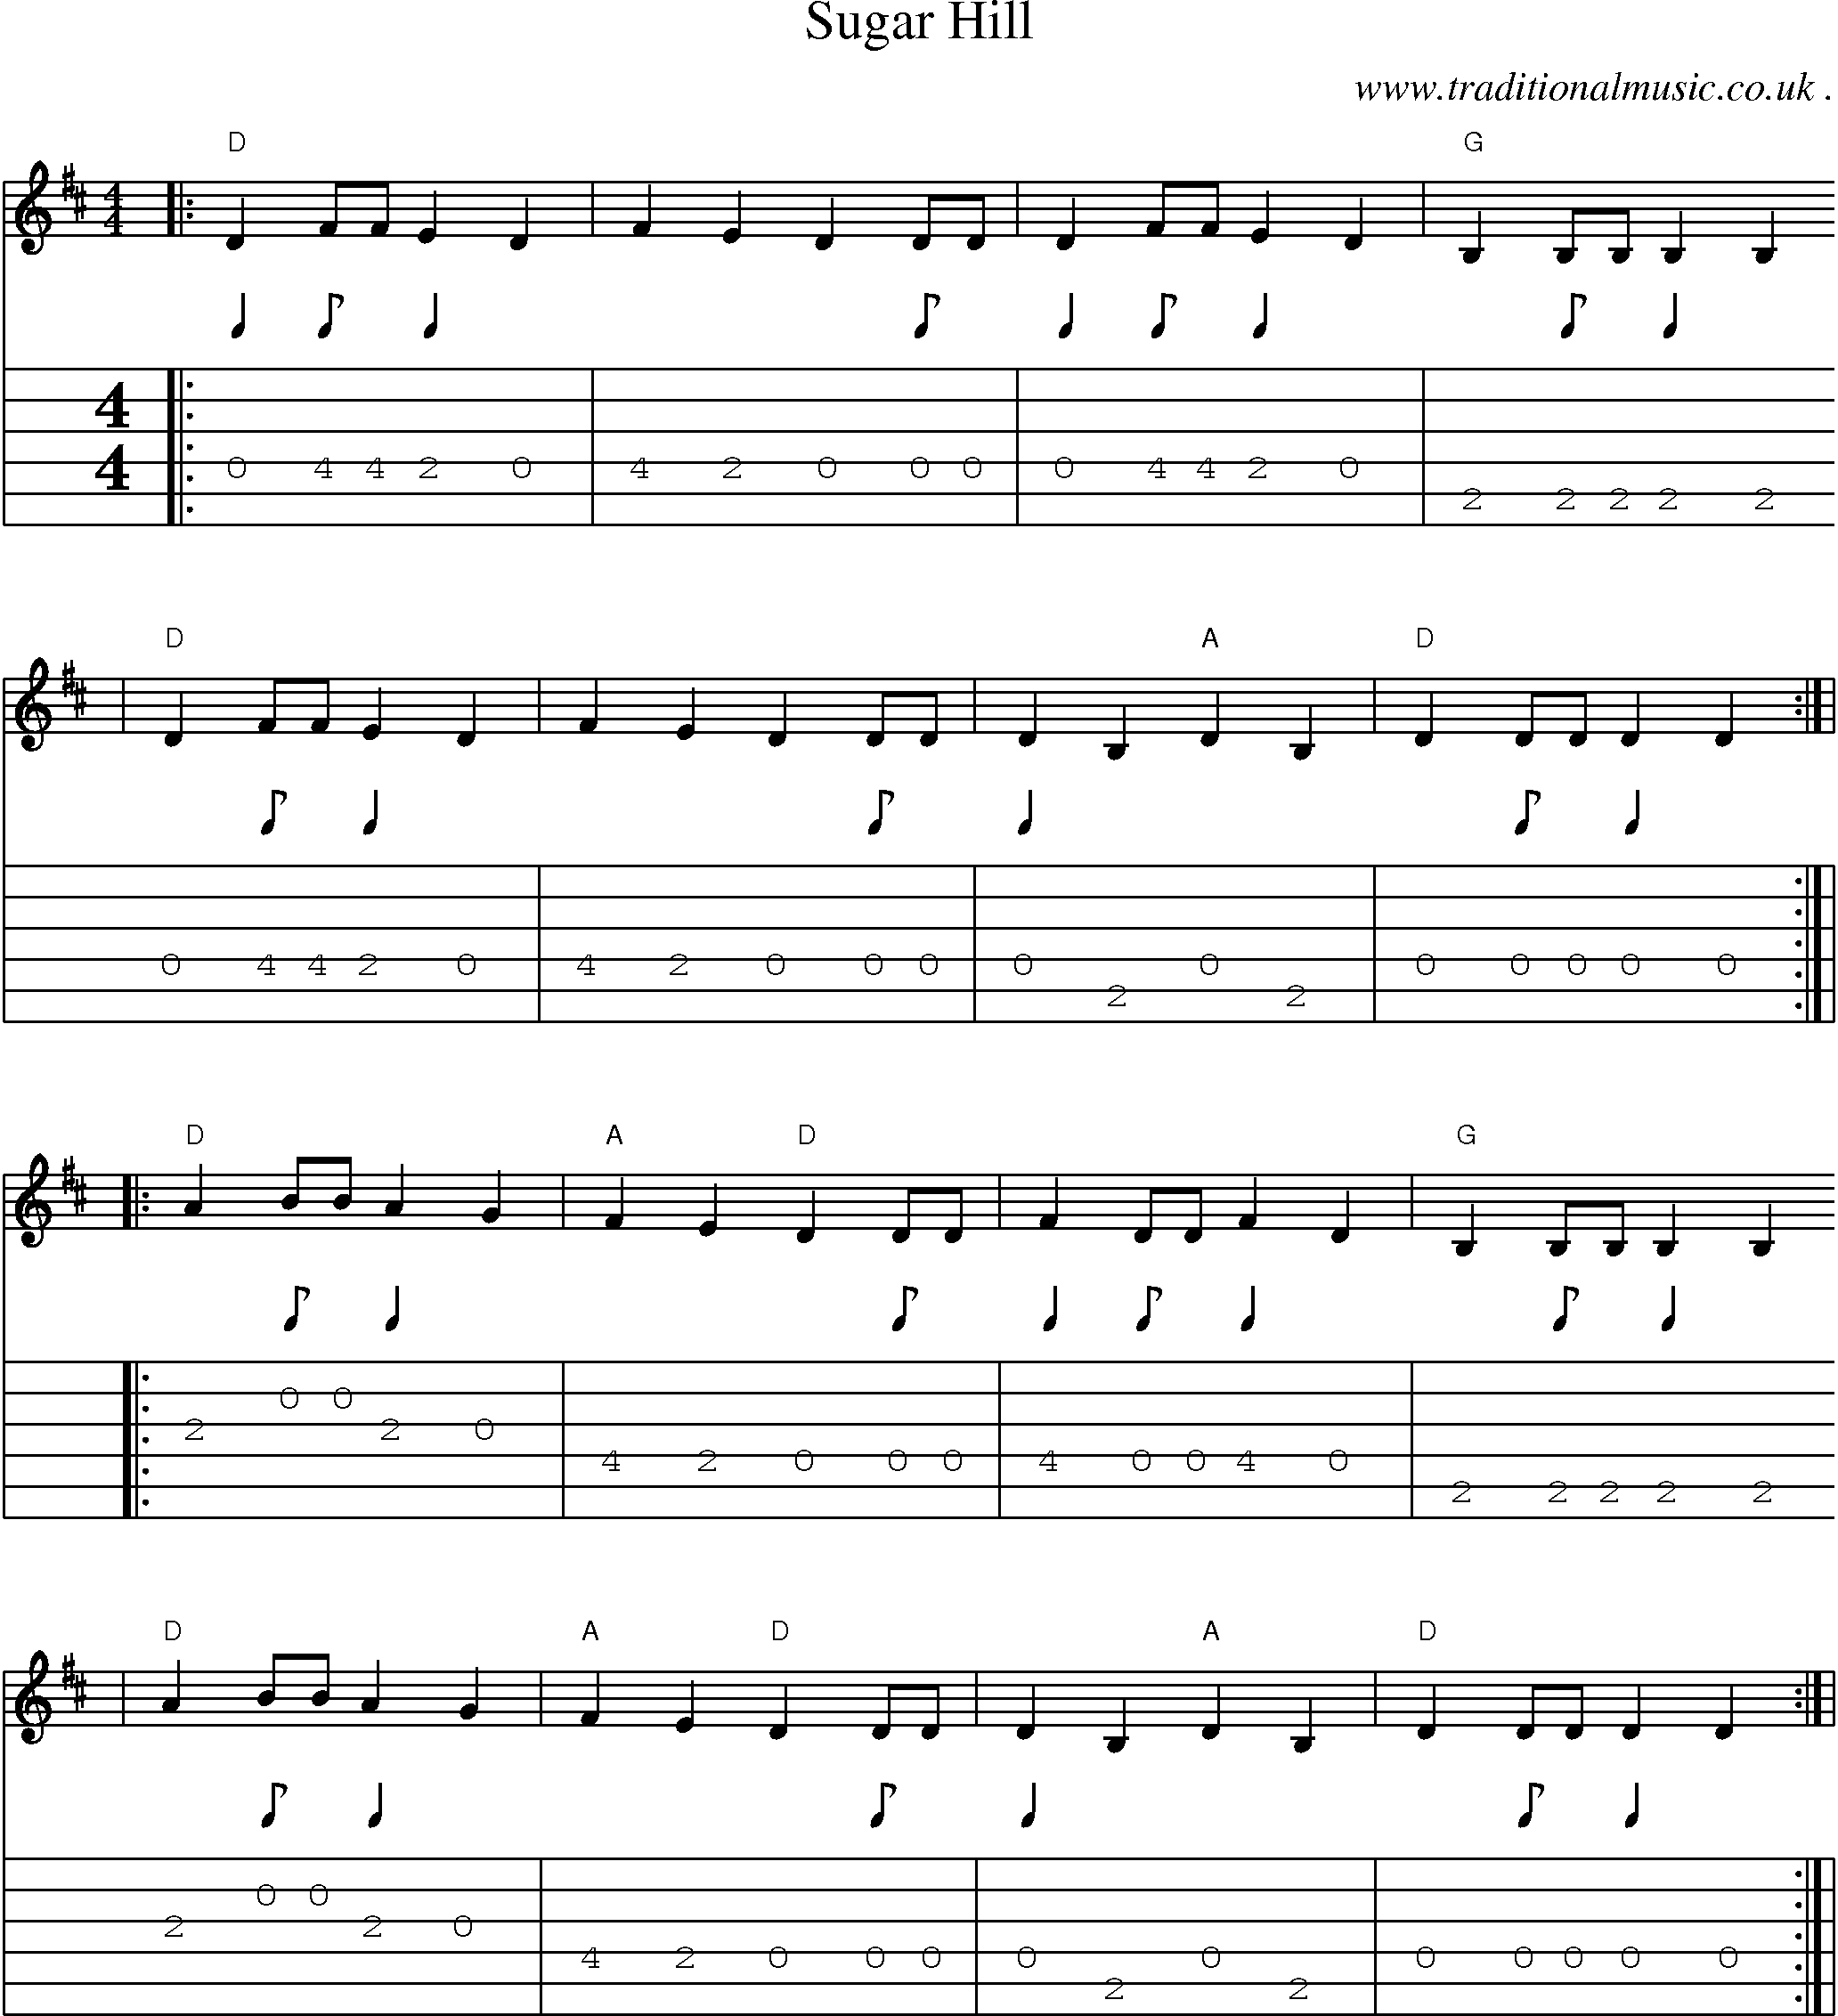 Music Score and Guitar Tabs for Sugar Hill